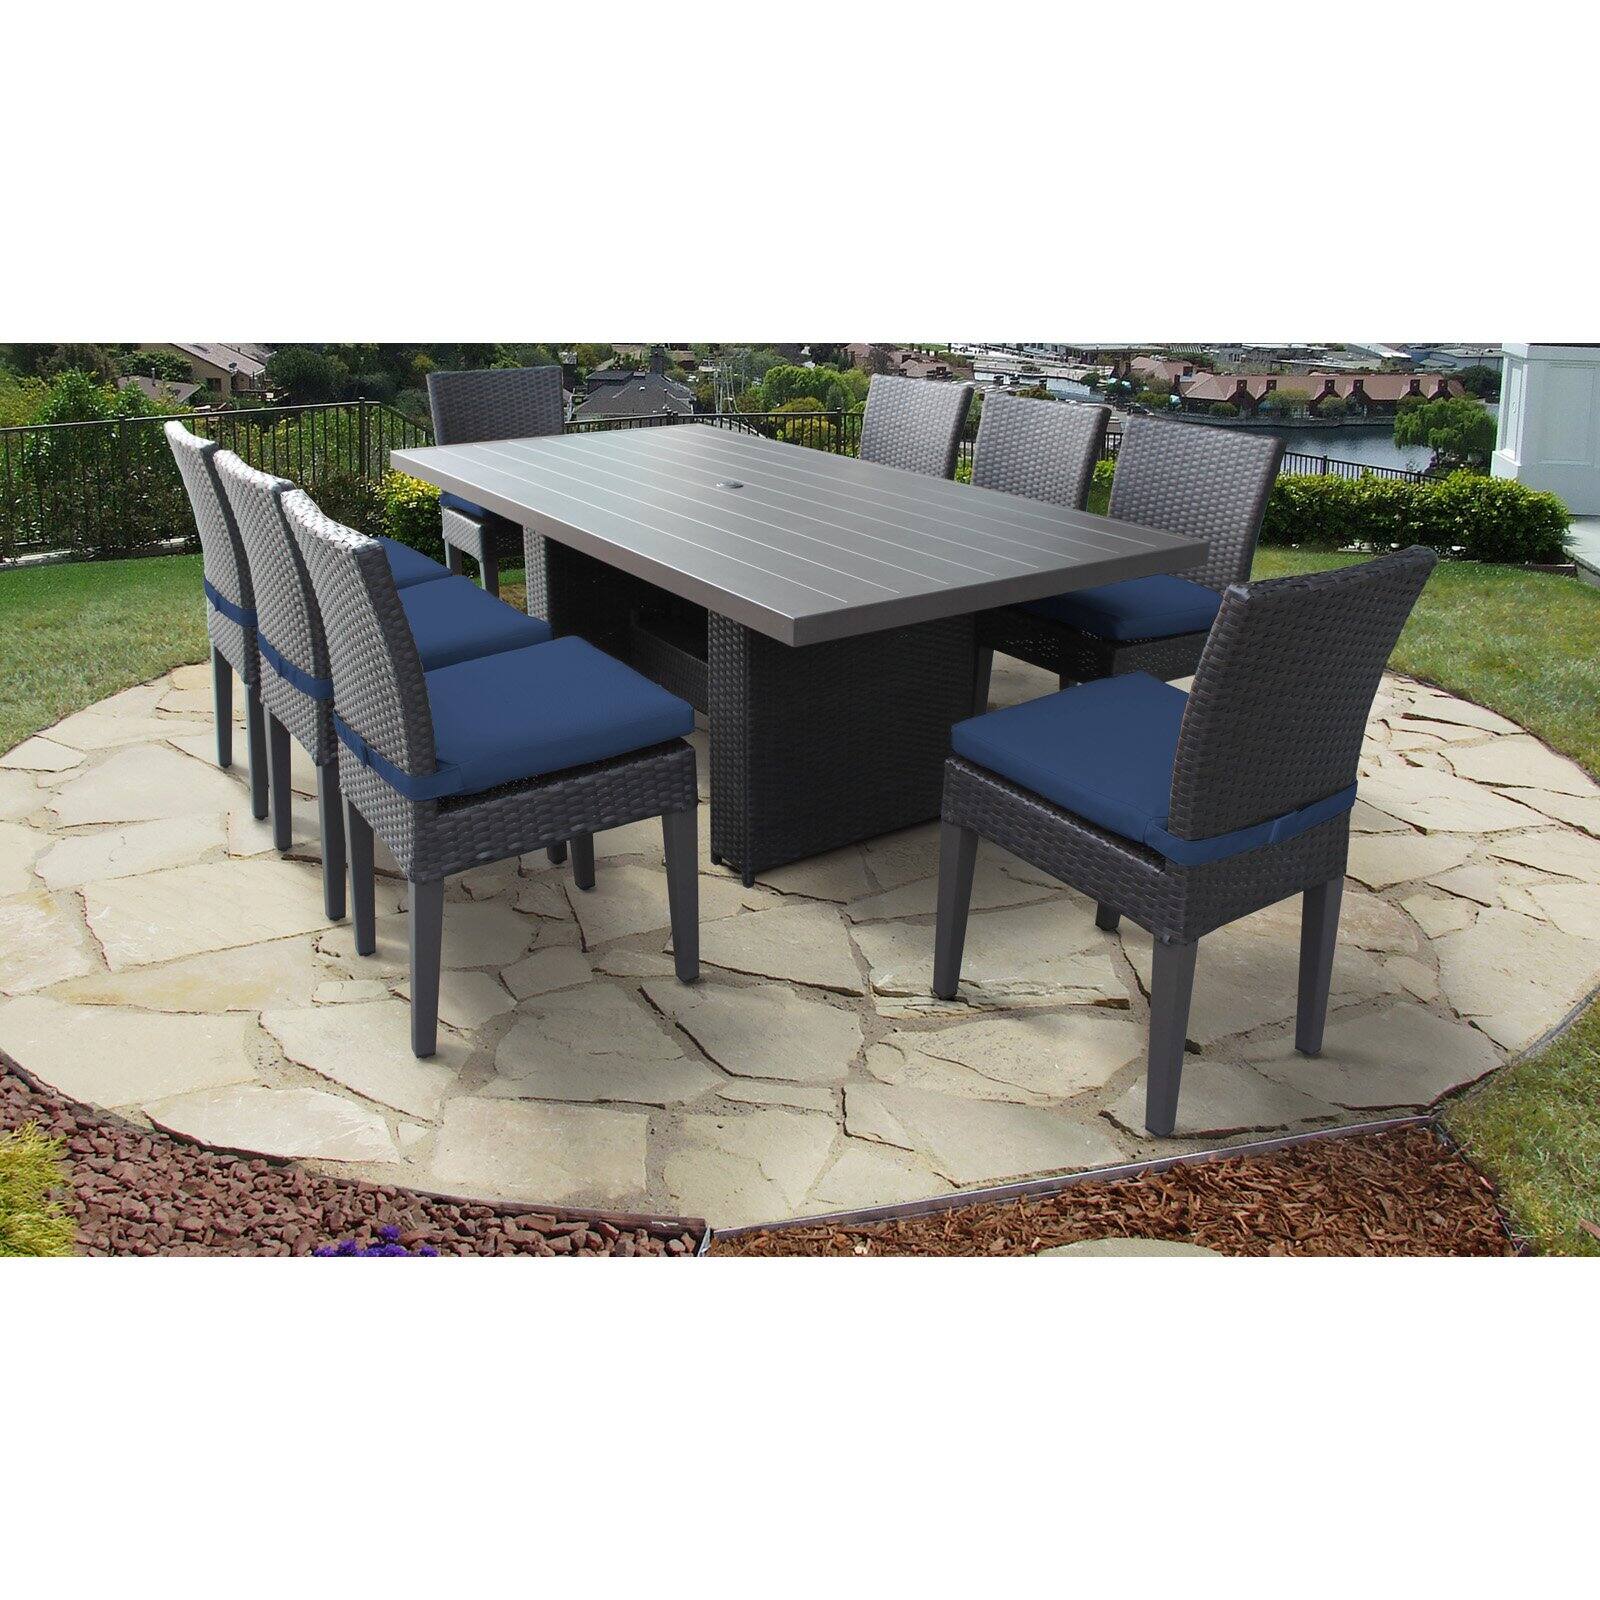 TK Classics Barbados Rectangular Outdoor Patio Dining Table with 8 Armless Chairs - image 1 of 2